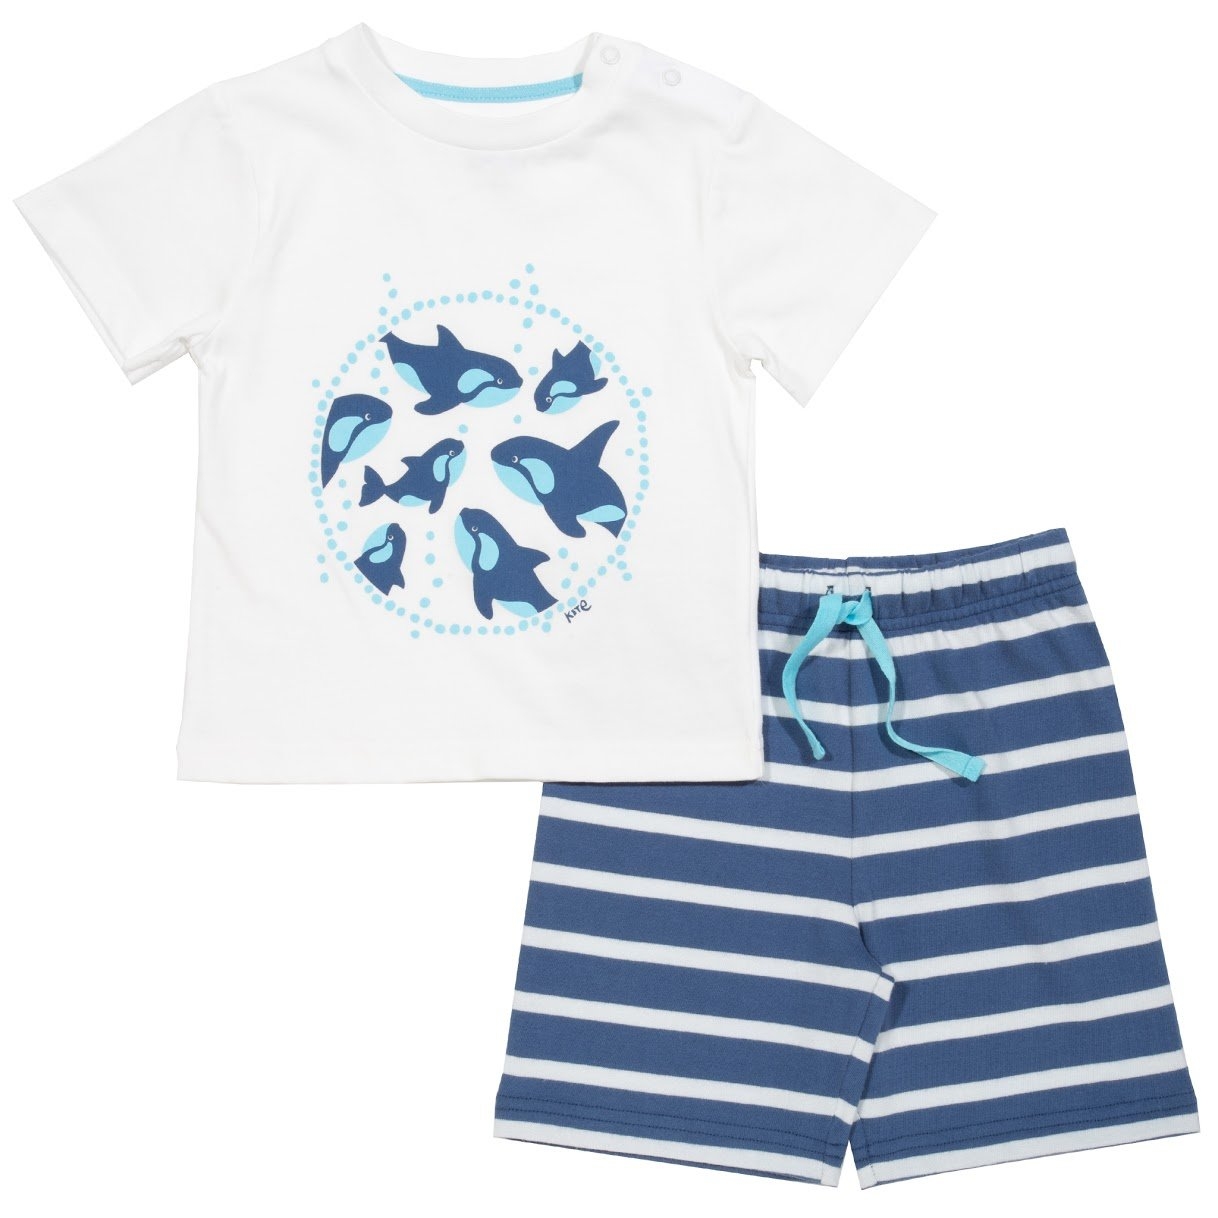 Kite Toddler Orca Pod Organic Cotton T-shirt and Shorts Set – Blue and White Stripe – 12-18 months